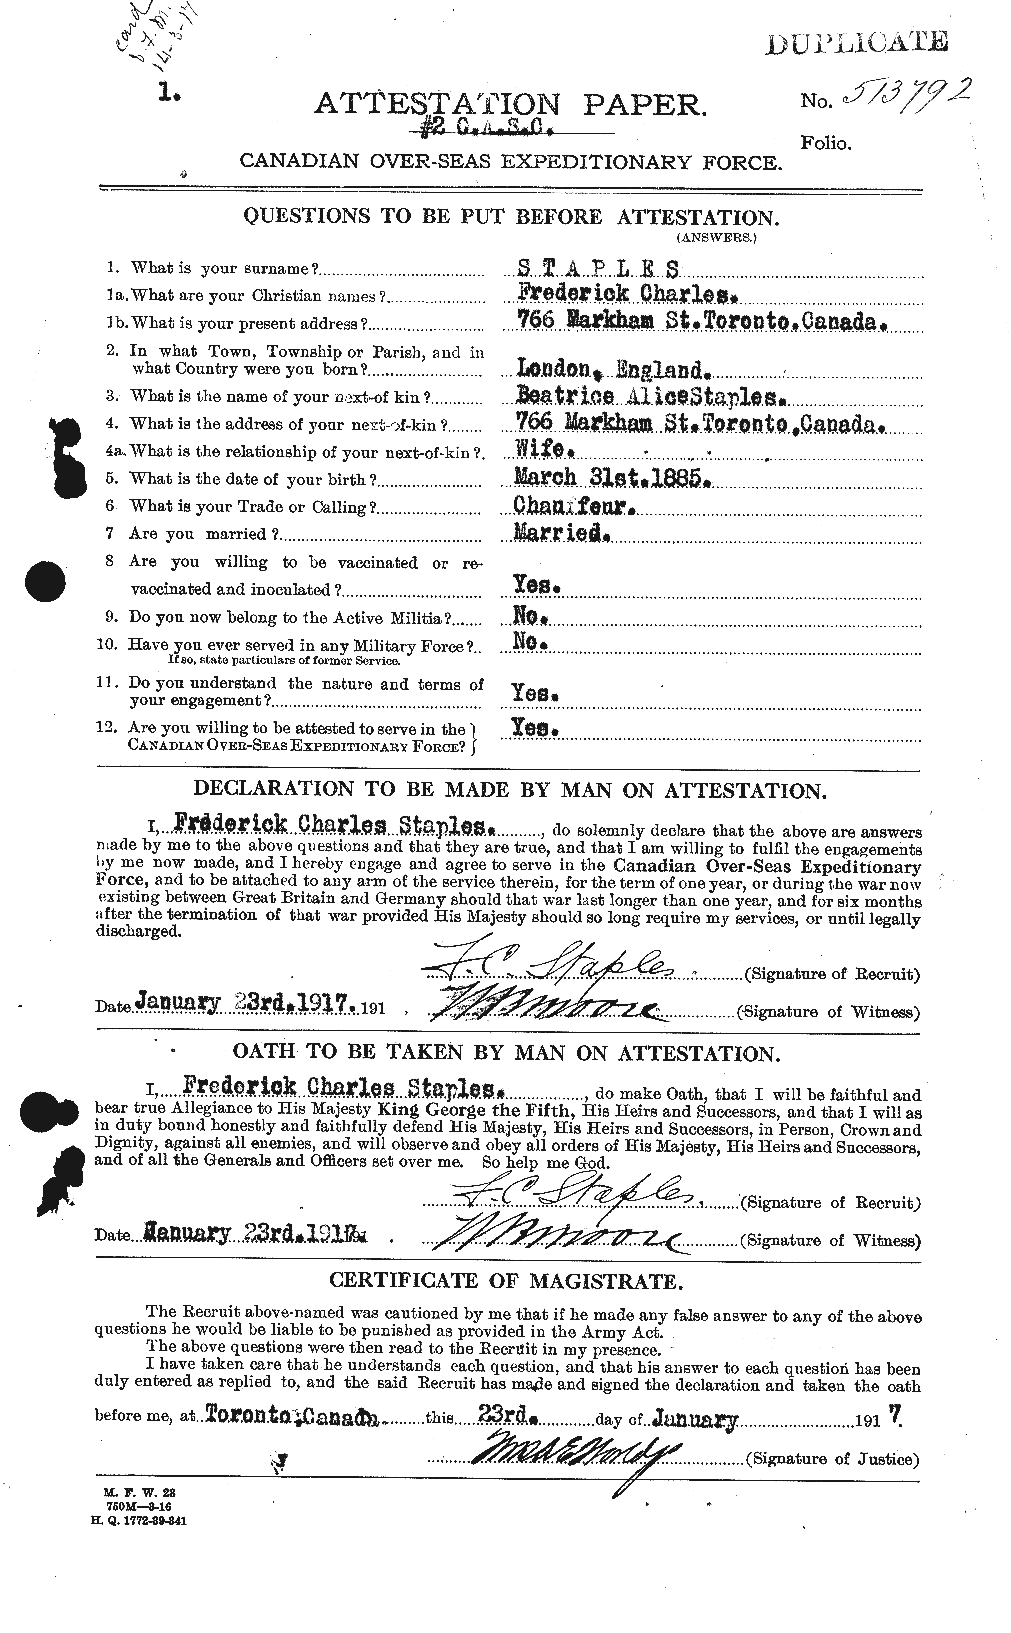 Personnel Records of the First World War - CEF 114182a